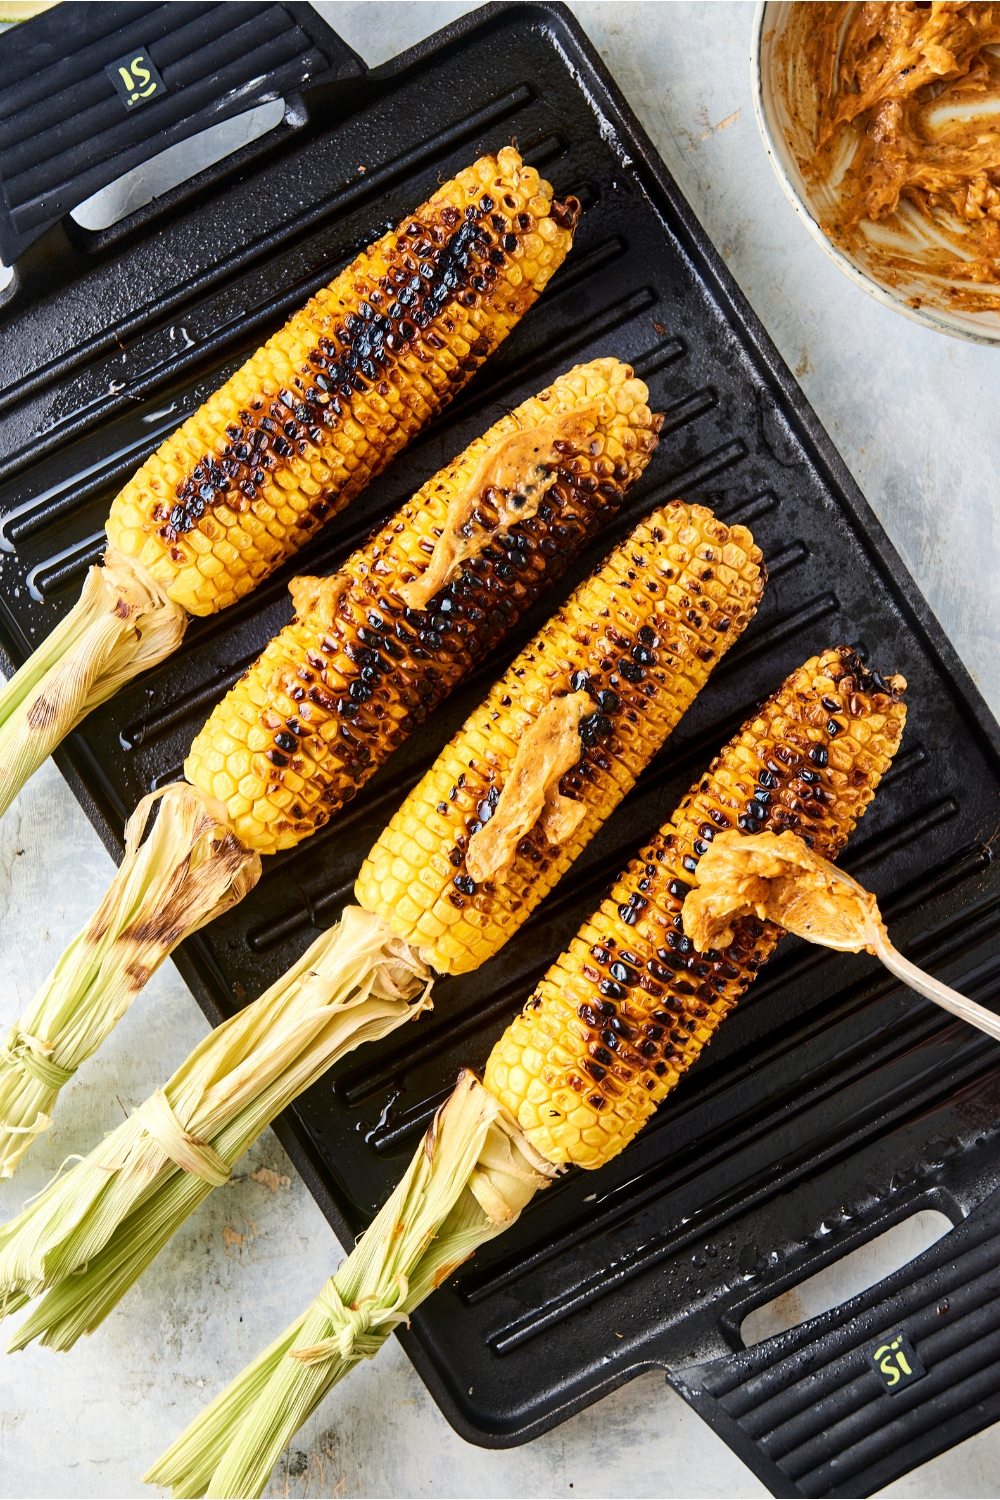 Someone spreads cajun seasoned butter over four cobs on corn on a grill pan.